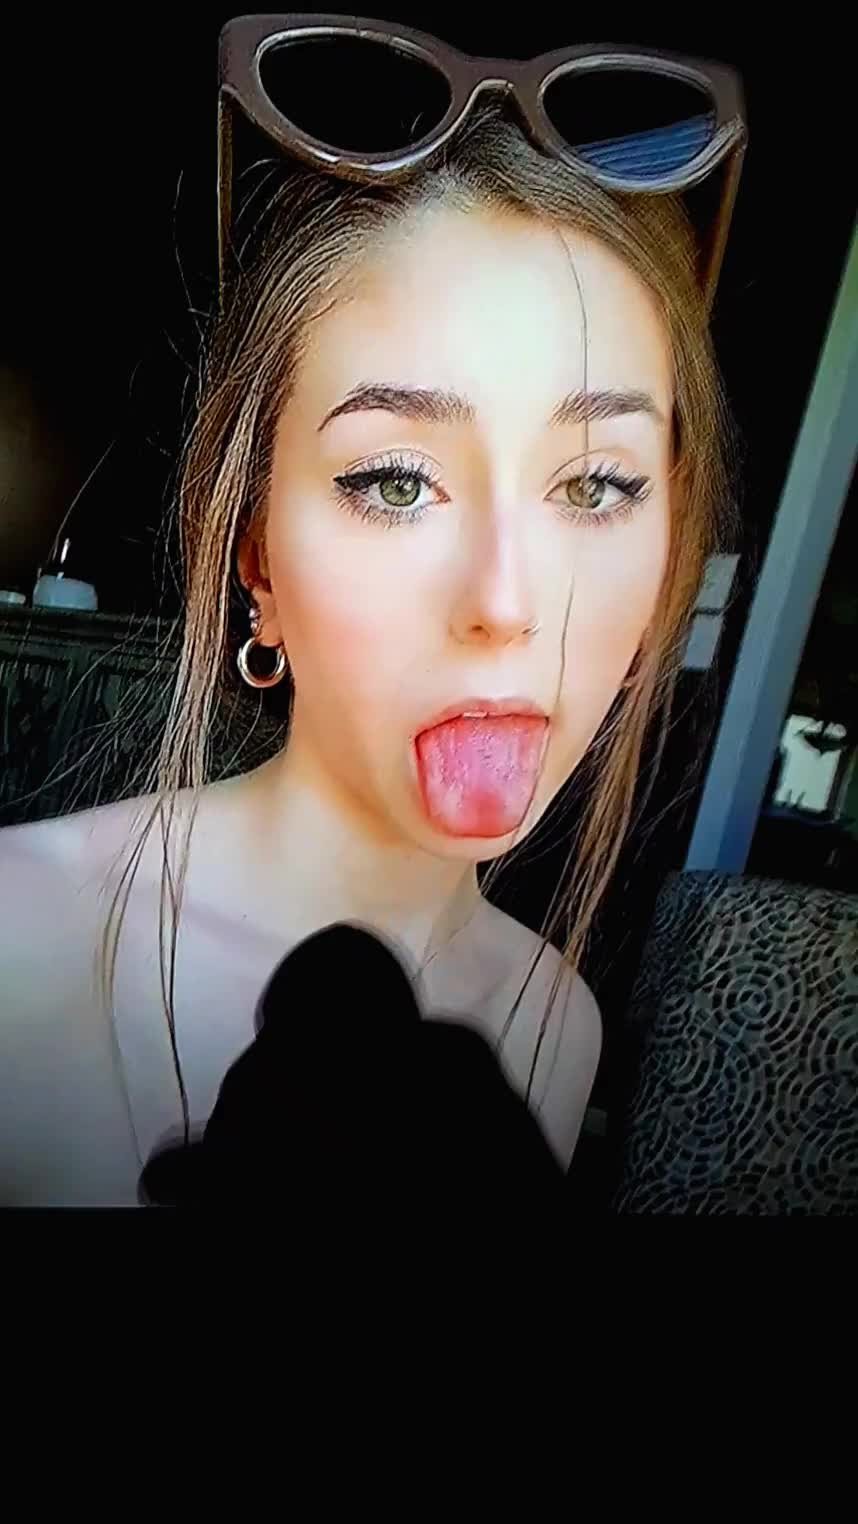 Video by LemmeTribute with the username @LemmeTribute,  February 7, 2022 at 9:43 AM. The post is about the topic Cum tributes